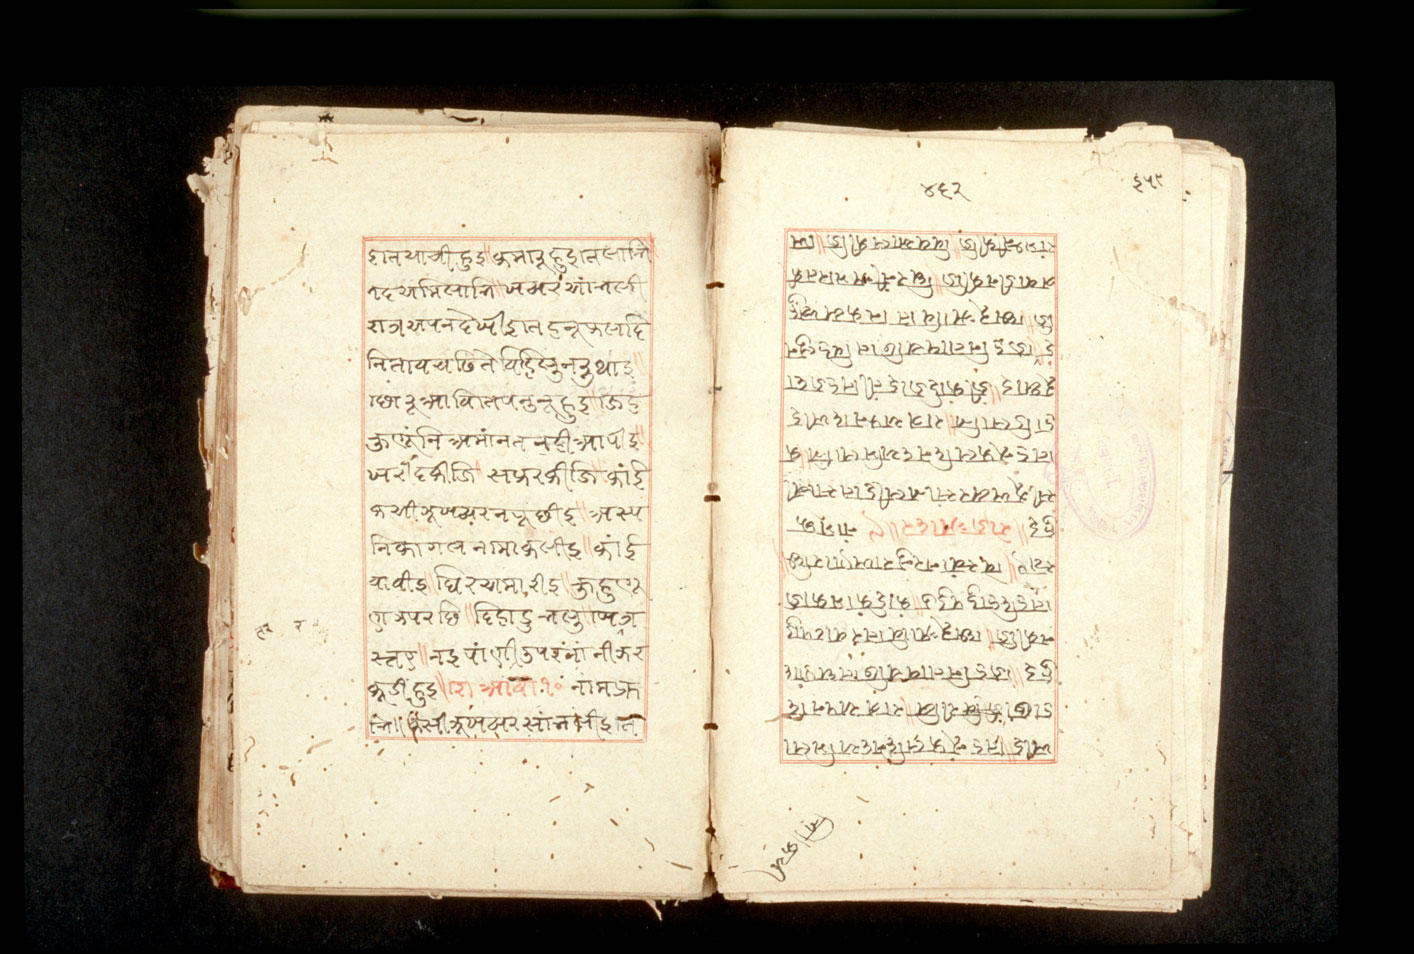 Folios 462v (right) and 463r (left)